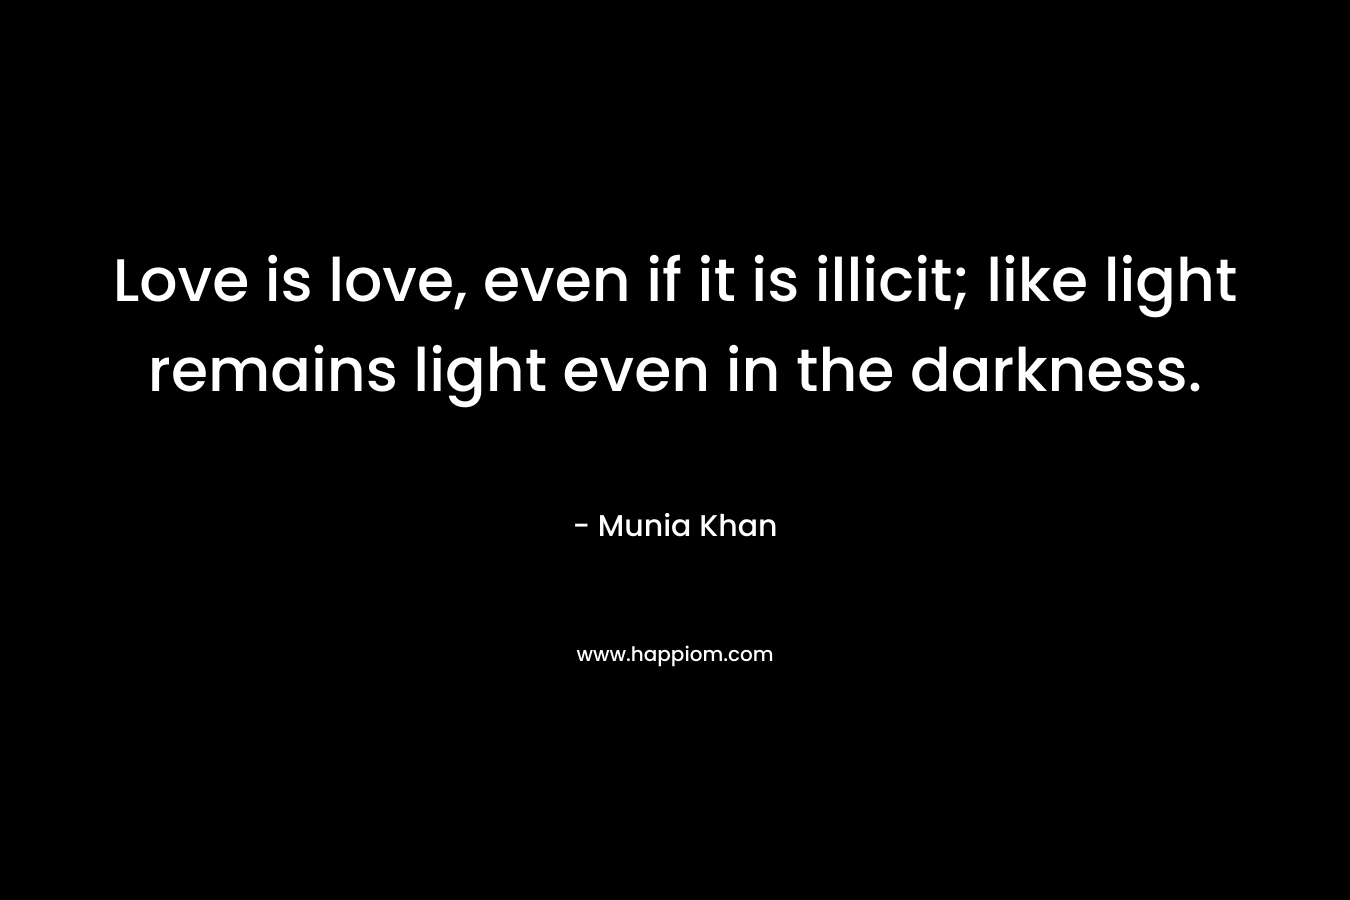 Love is love, even if it is illicit; like light remains light even in the darkness.